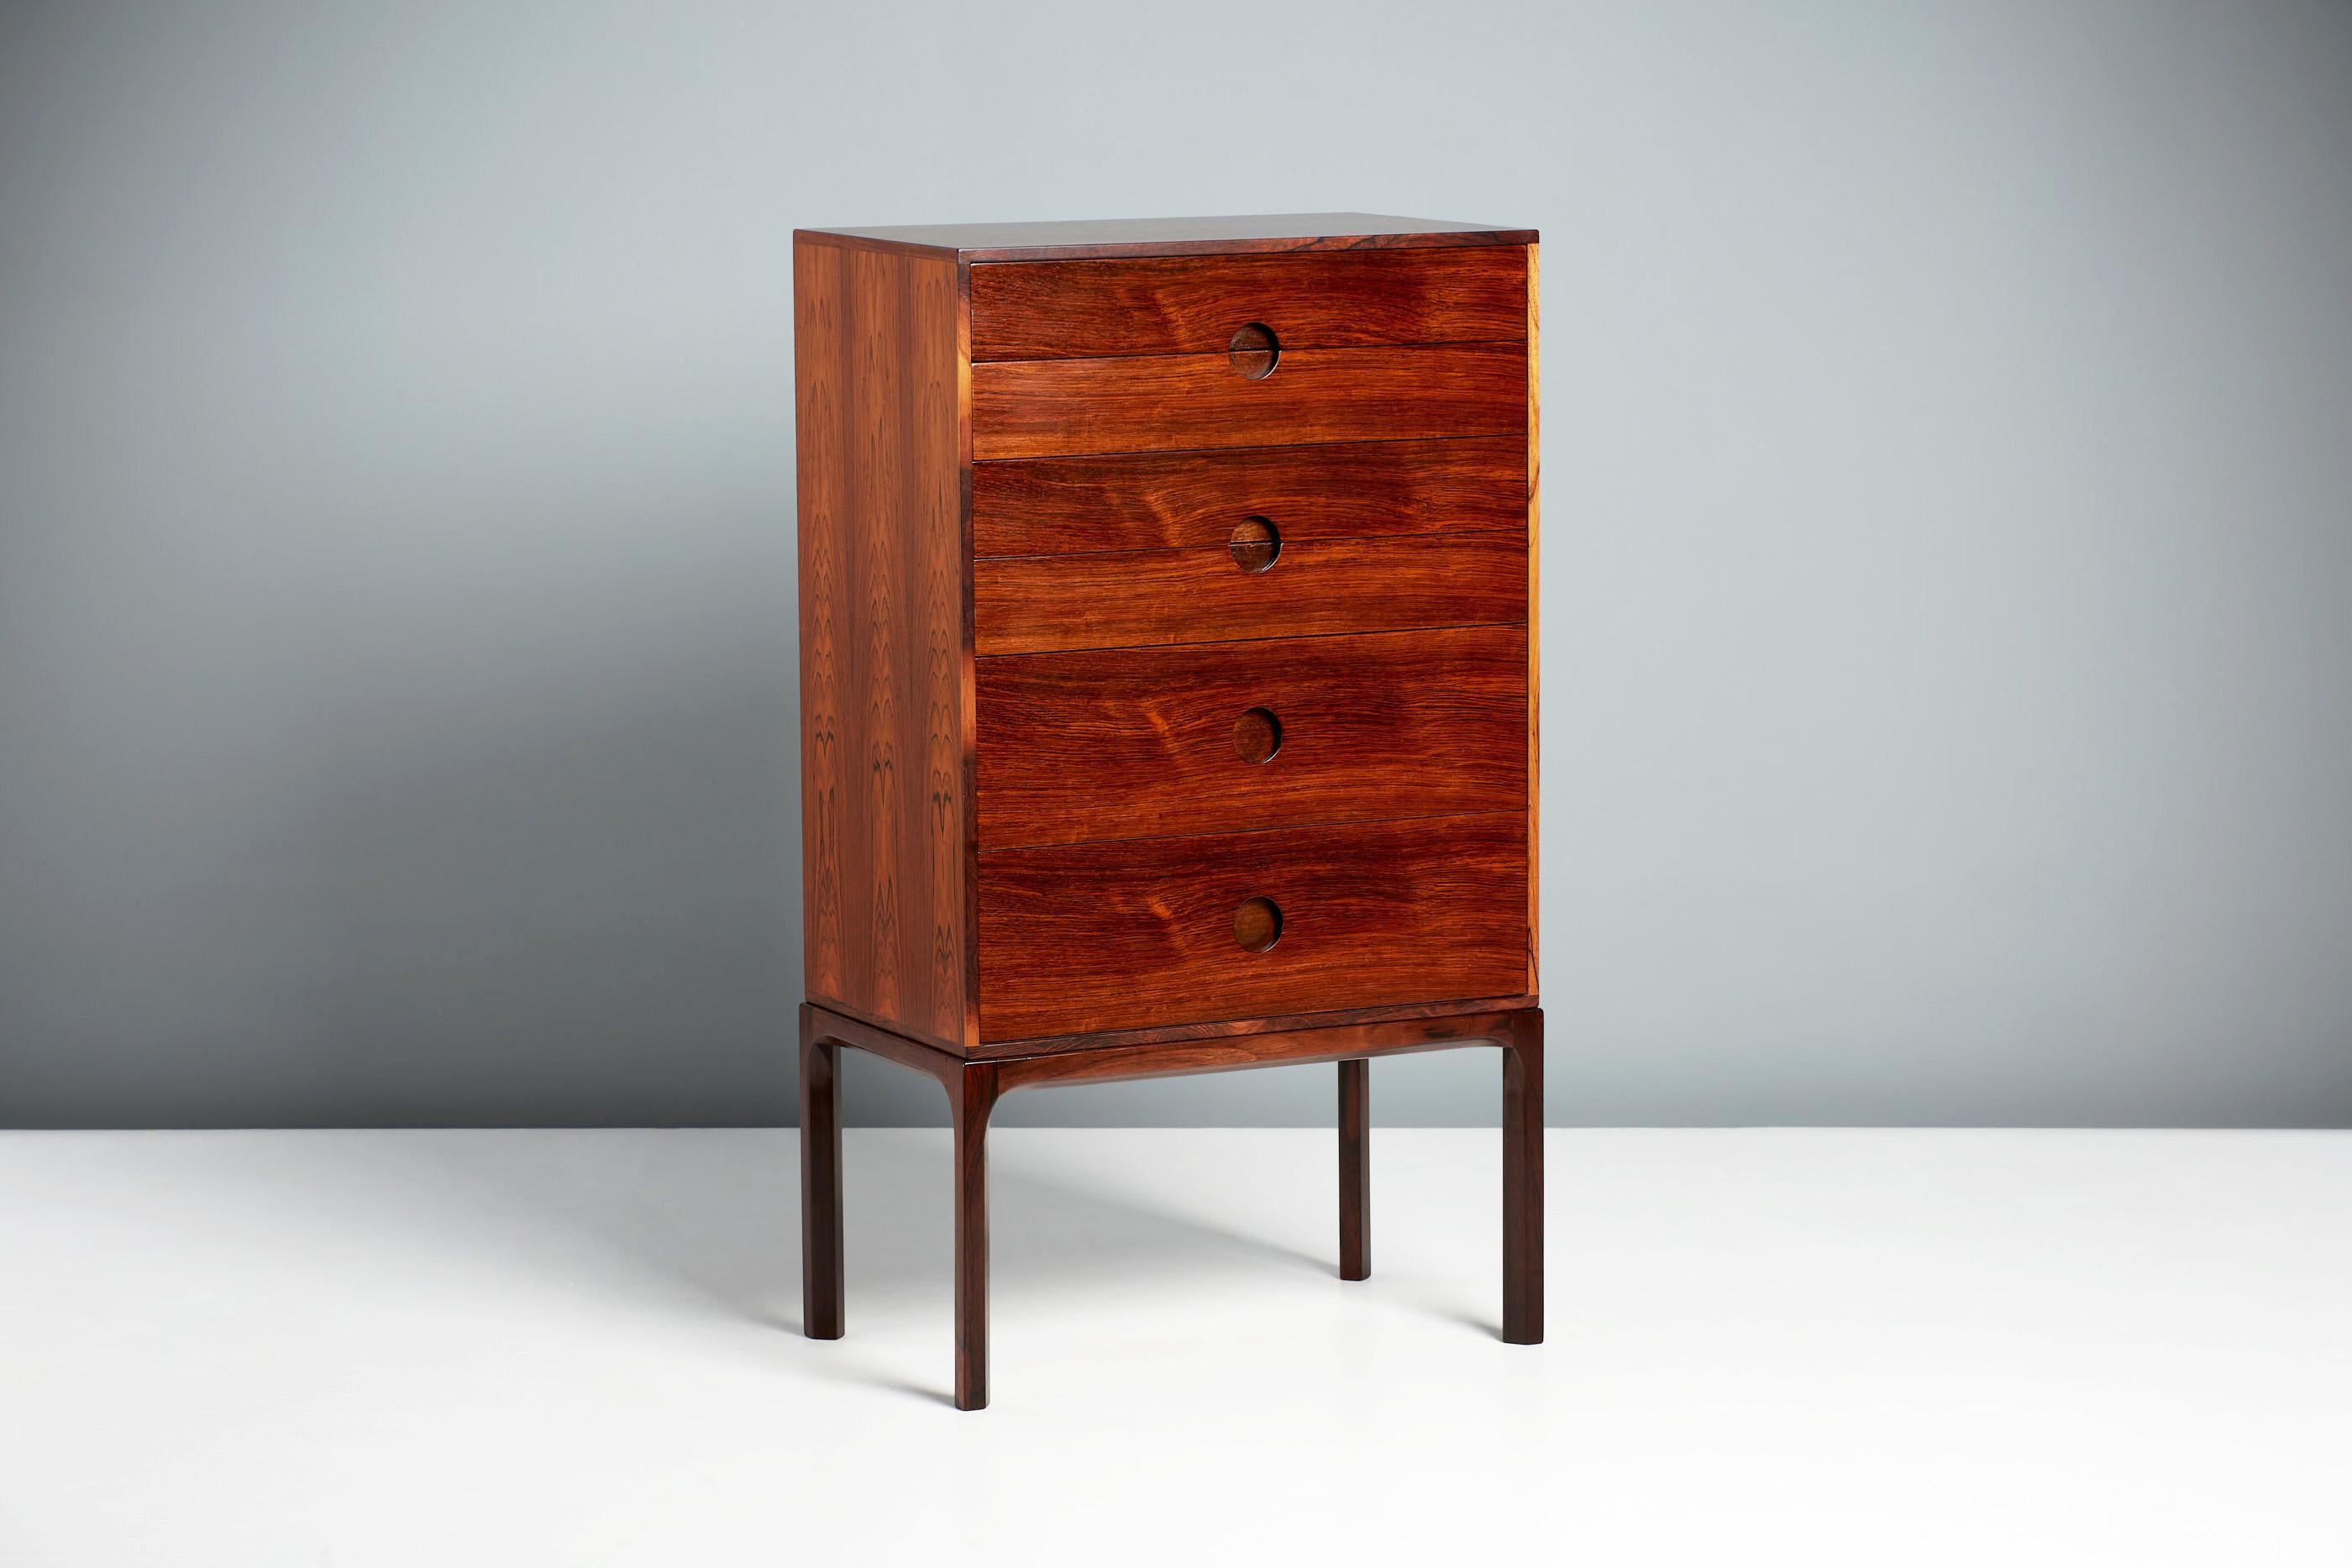 Kai Kristiansen Model 385 Chest of Drawers, circa 1960

Rosewood tallboy chest, produced by Aksel Kjersgaard in Odder, Denmark. Solid rosewood frame with veneered cabinet and half-moon drawer pulls. Refinished in Danish oil. Rarely seen model from